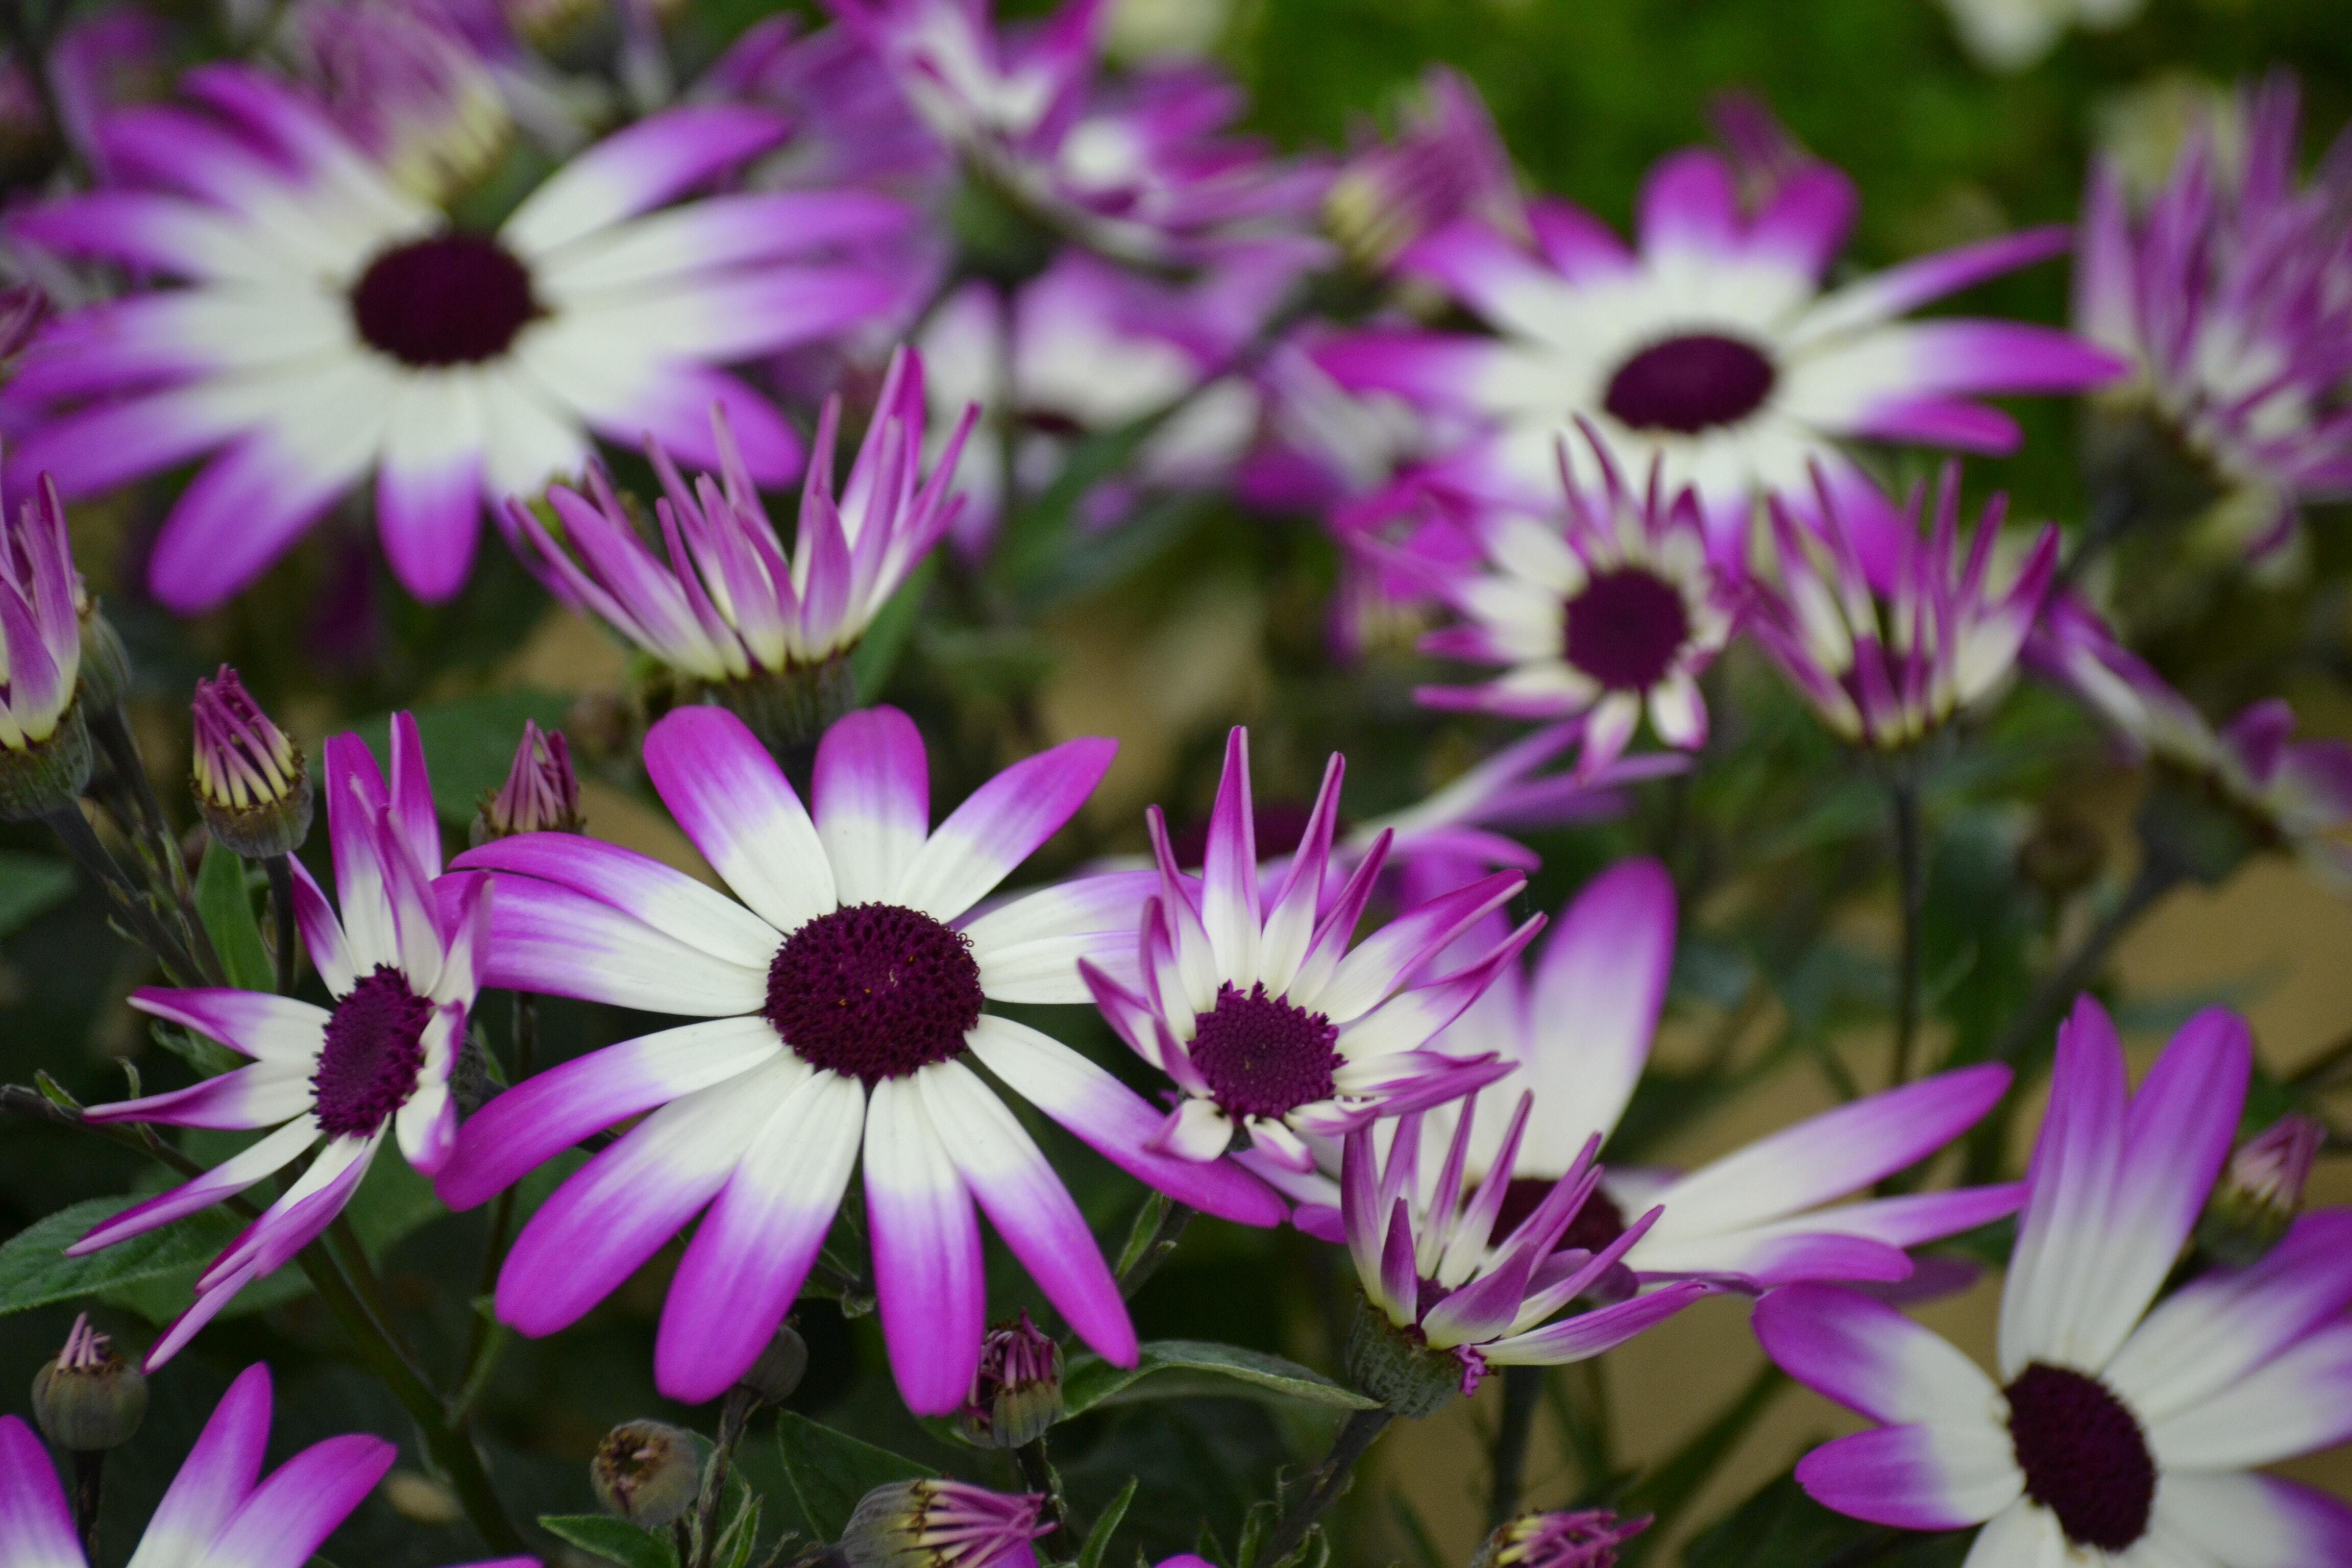 Close-up of purple and white flowers